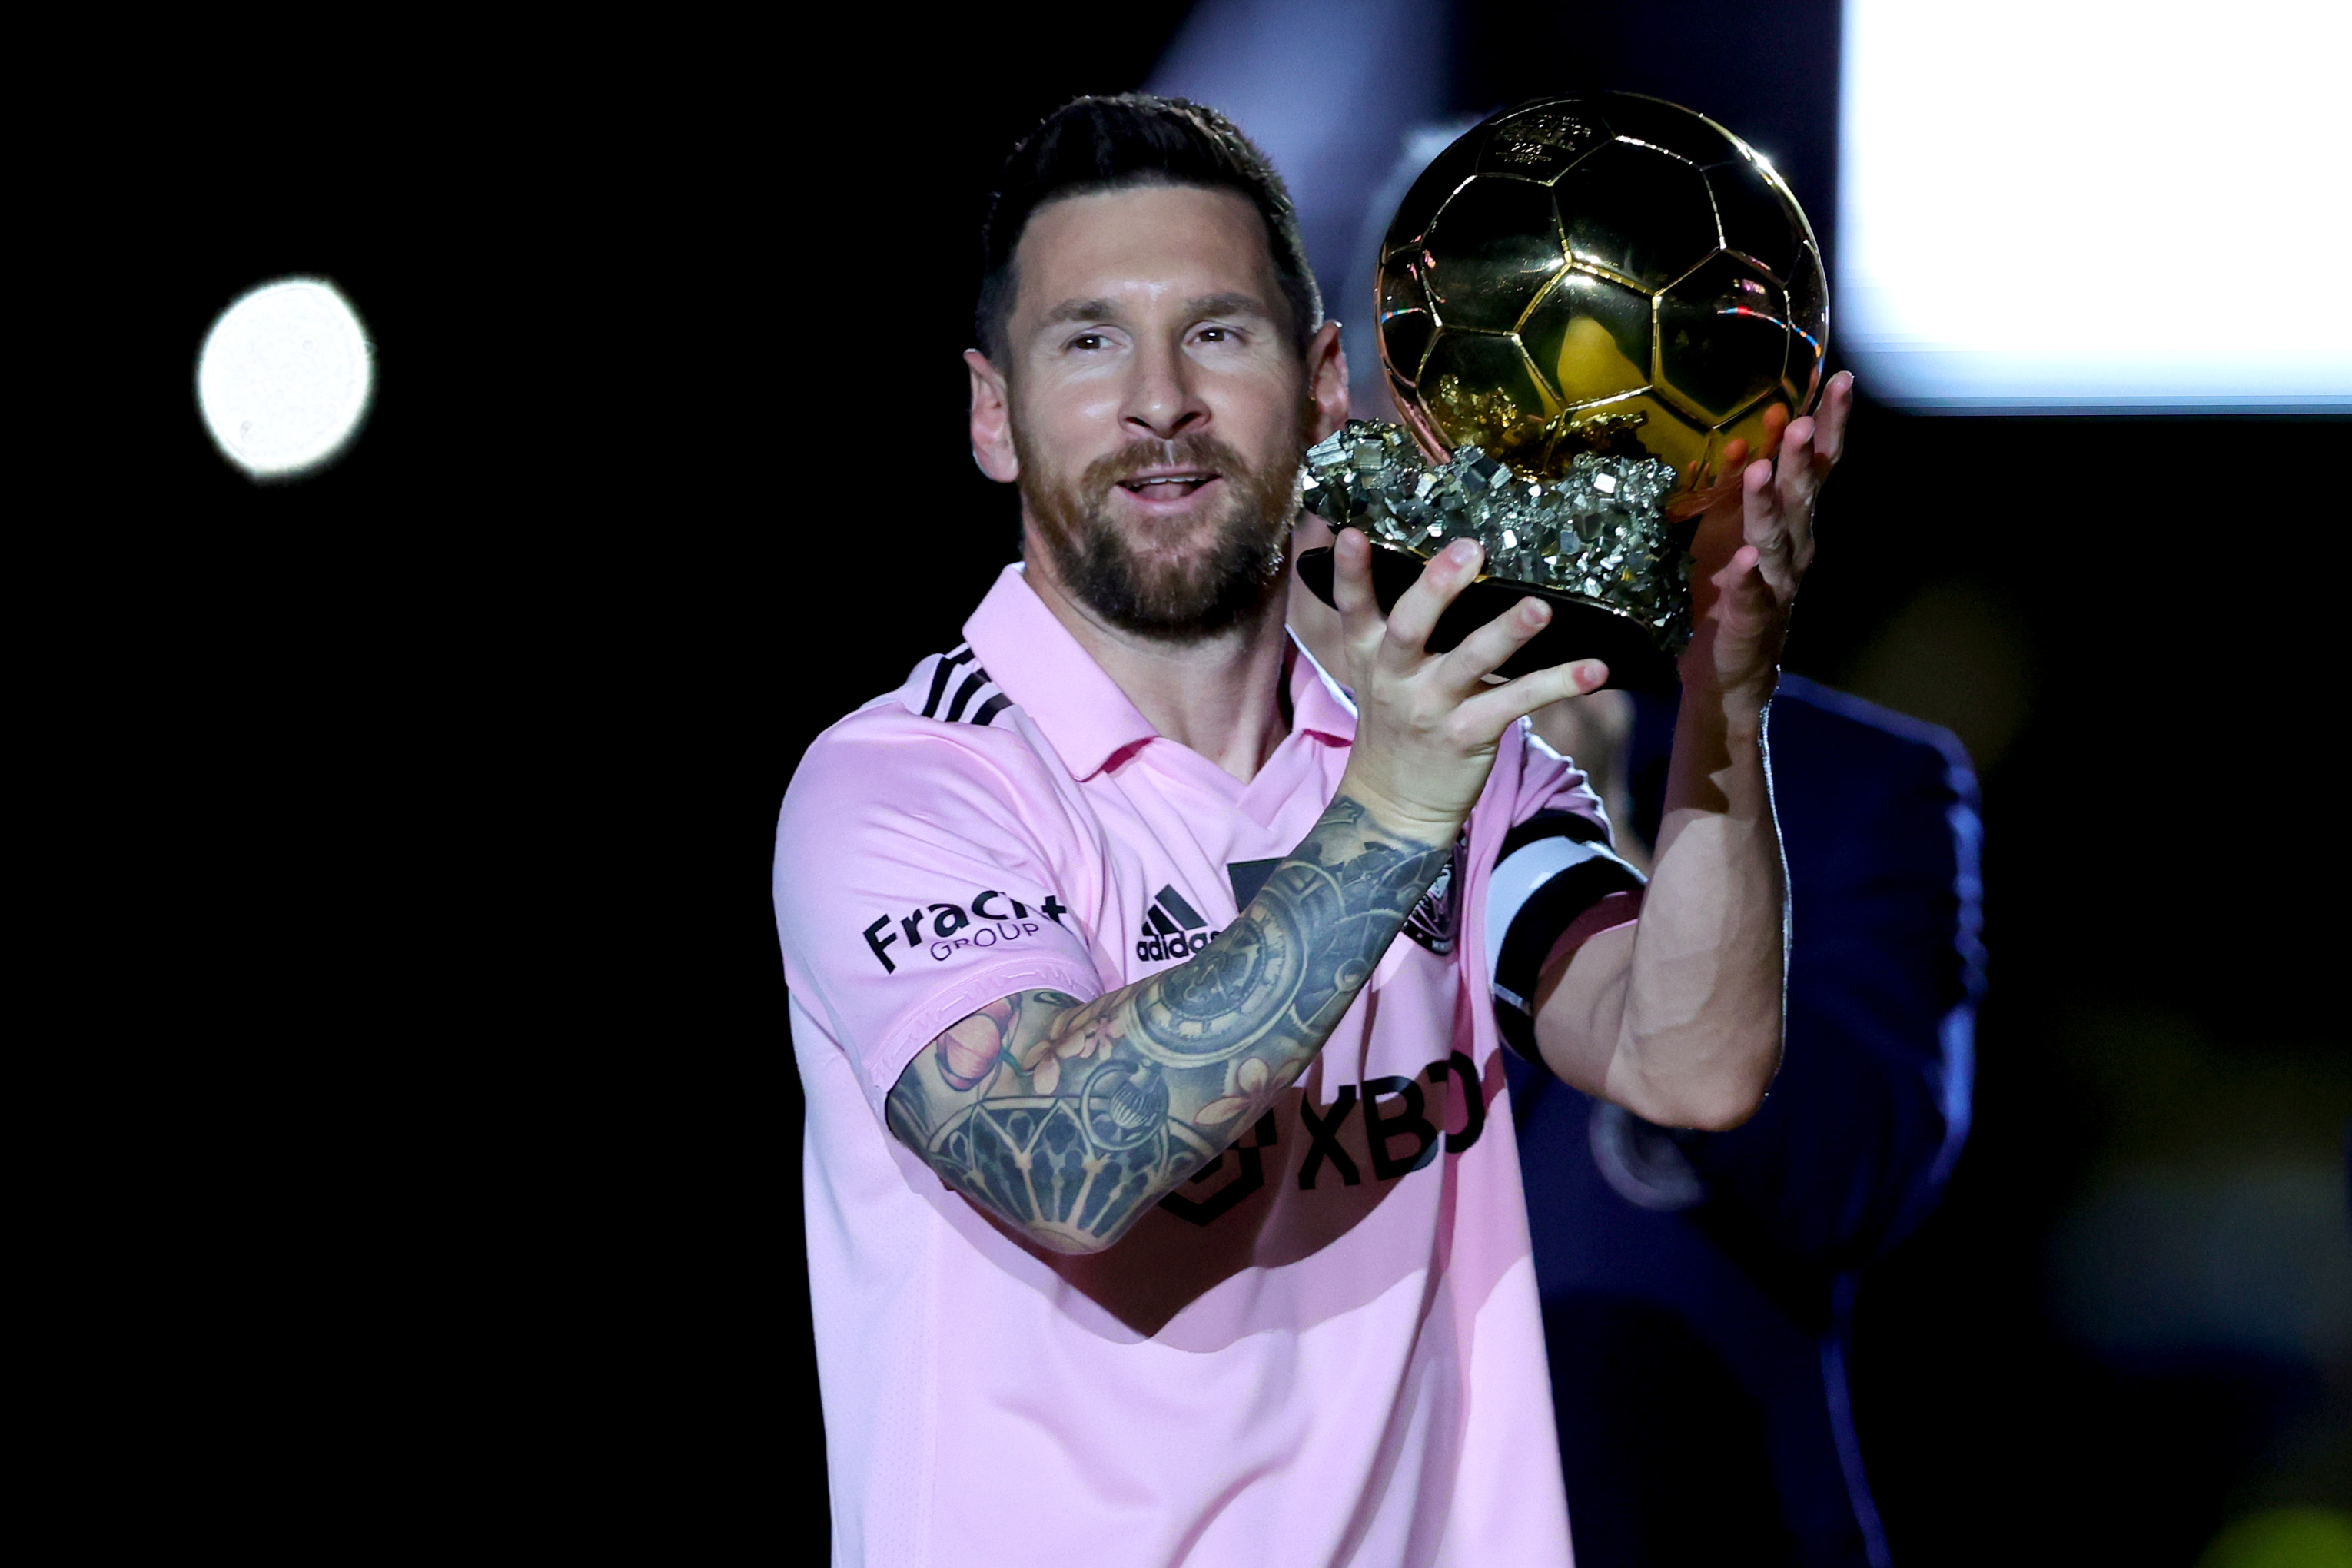 Lionel Messi calls MLS ‘minor league’ while revealing potential World Cup status